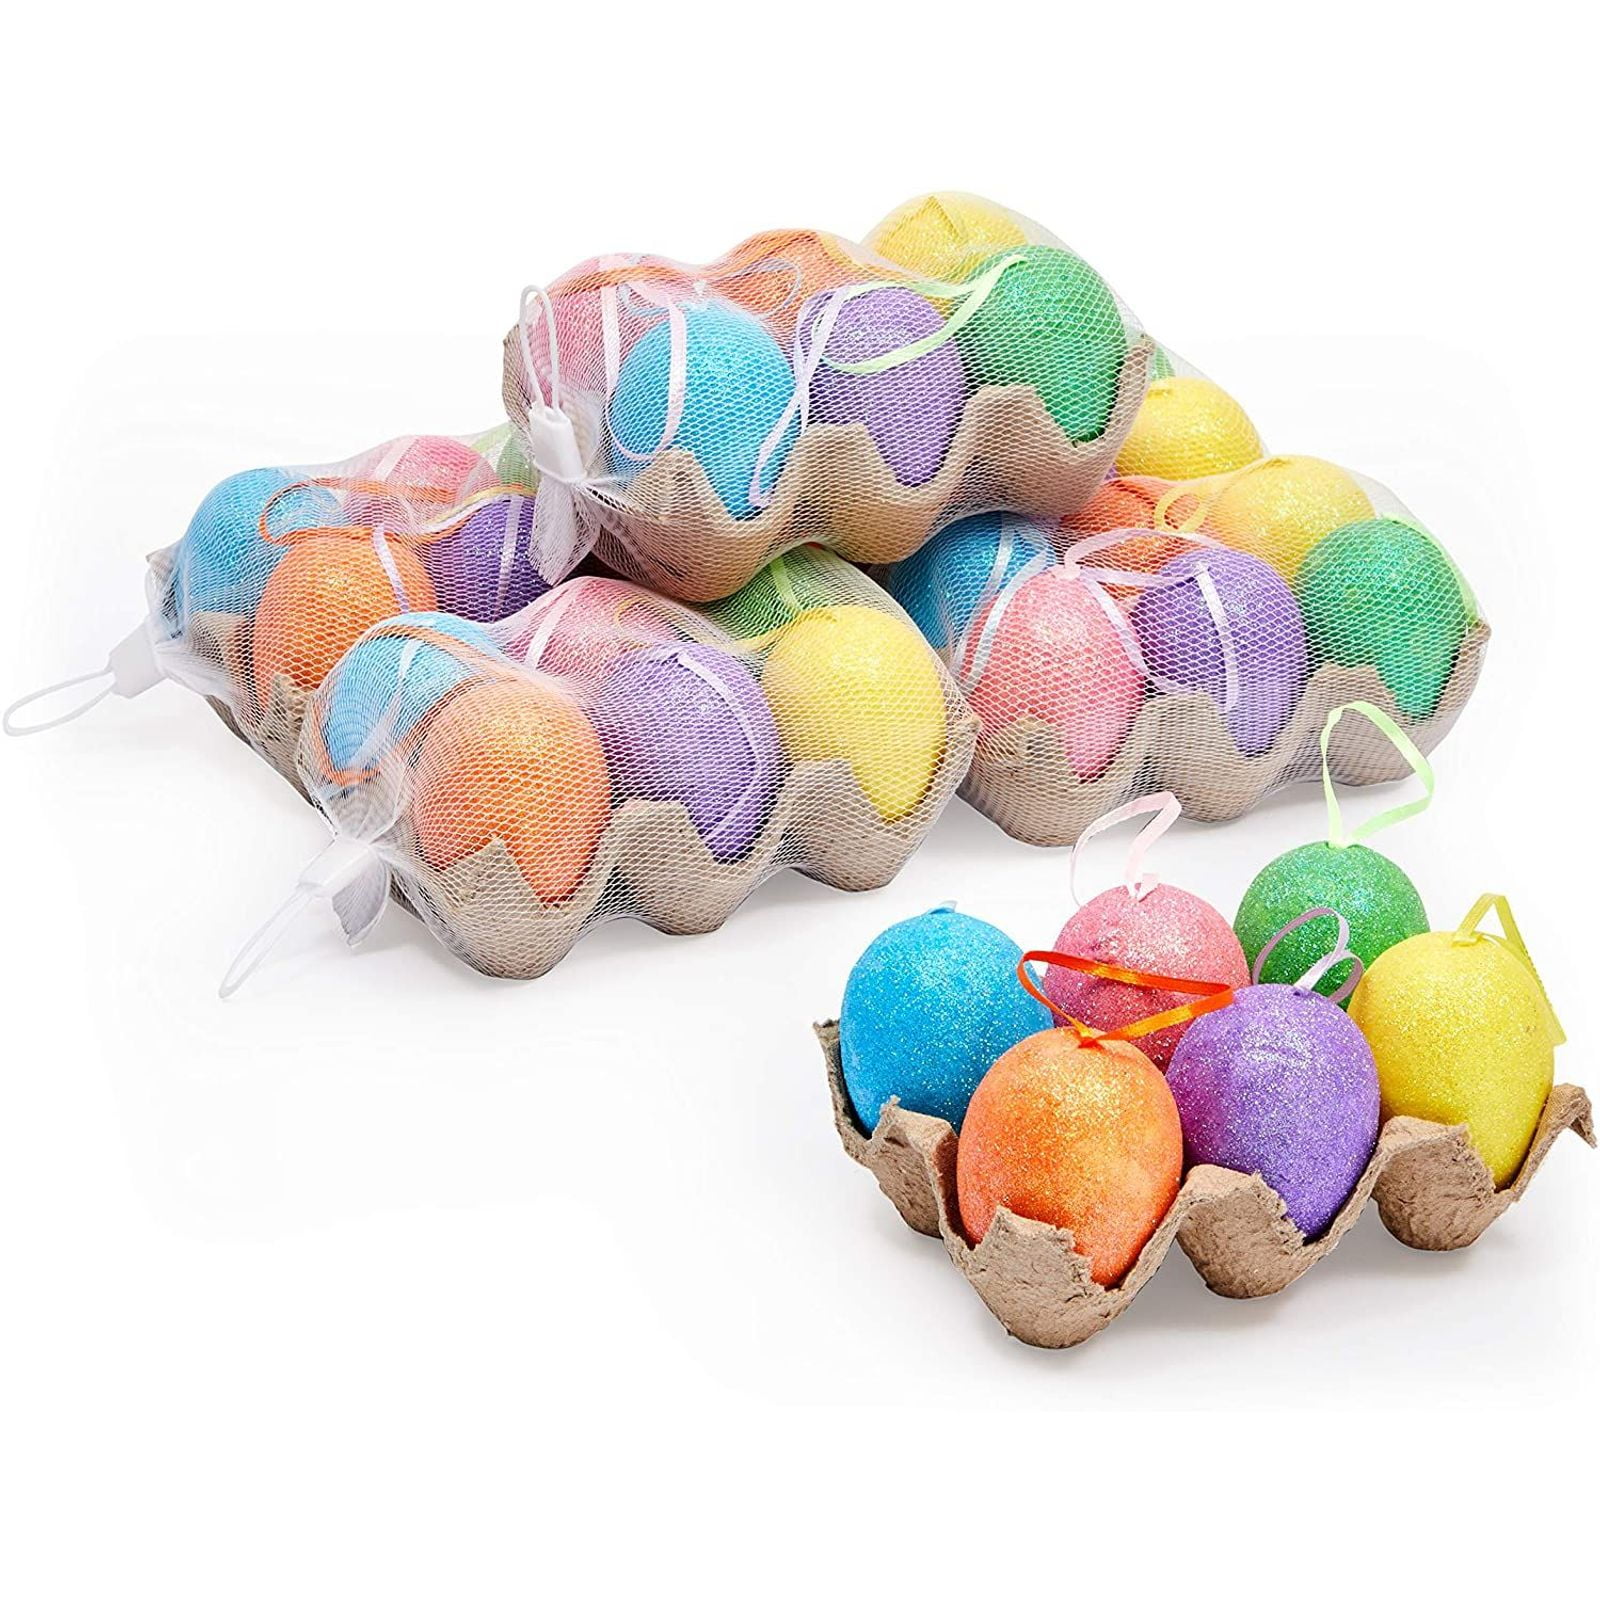 YEAHBEER 72 Pcs Plastic Printed Bright Easter Eggs-Colorful Printed Eggs Easter Hunt Basket Stuffers Fillers,Filling Treats and Party Favor